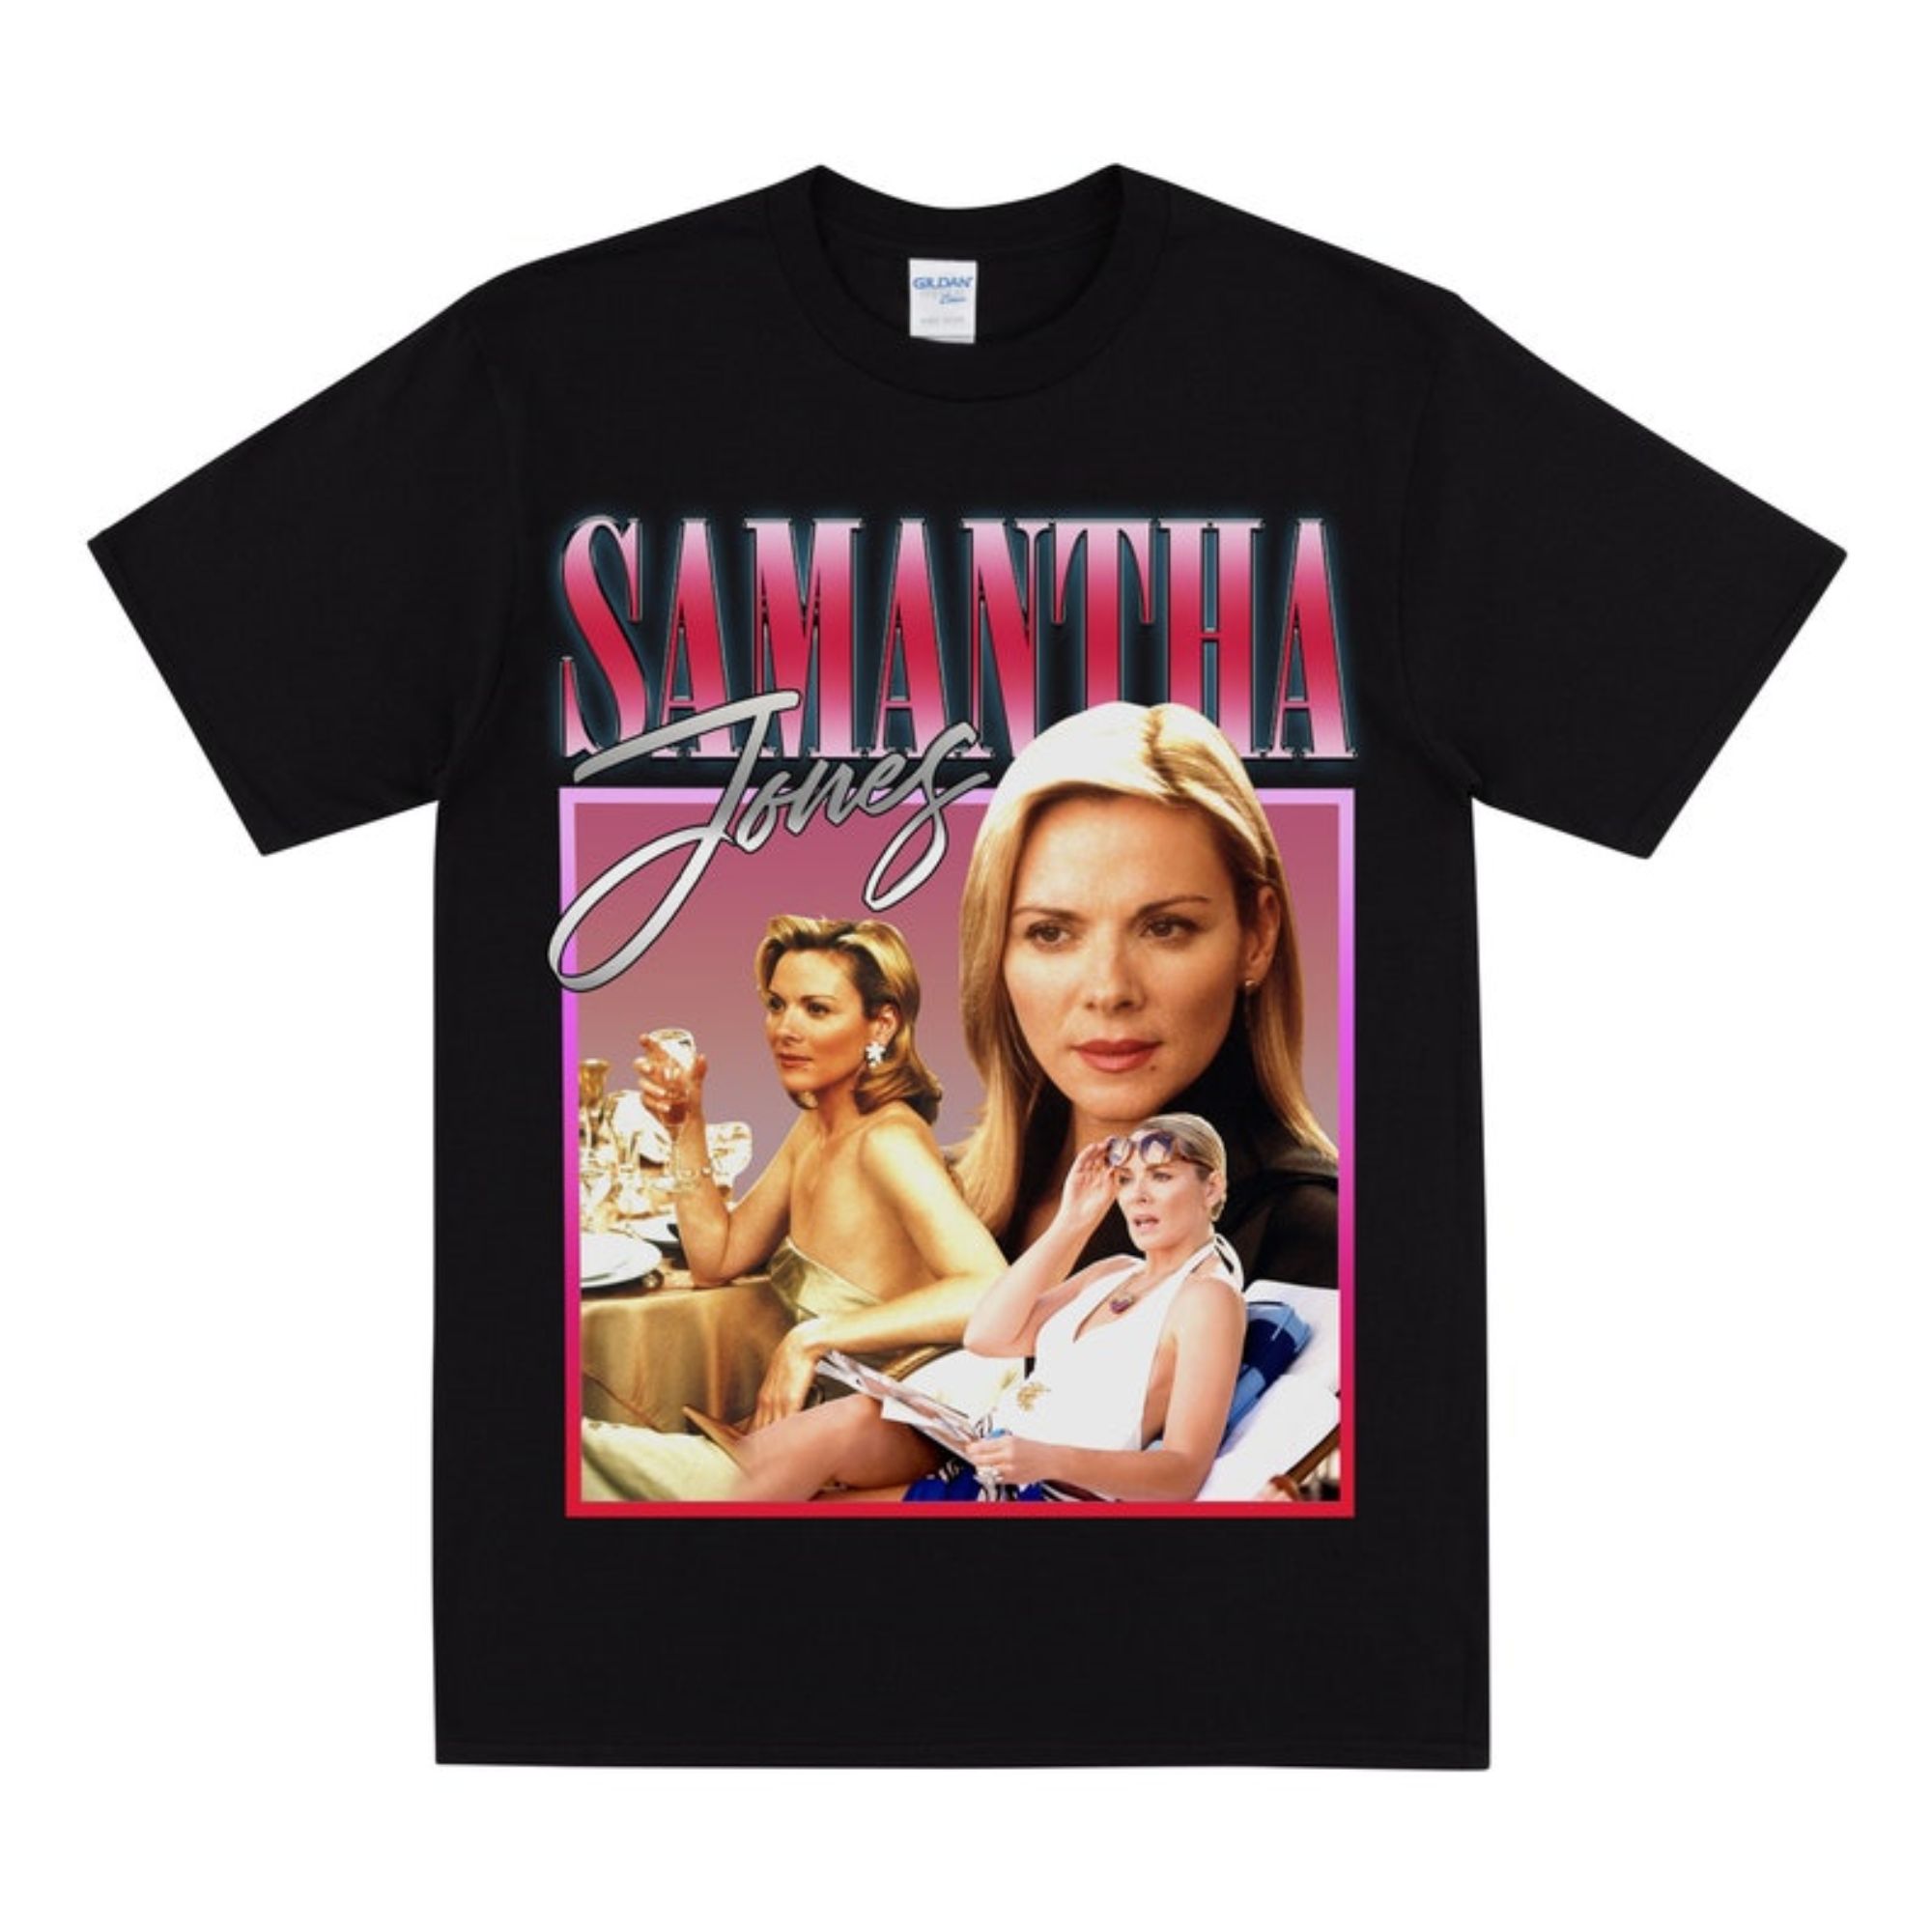 samantha from sex and the city t shirt for women for satc fans vintage 90s inspired unisex t shirt gift for wife girlfriend pic picture